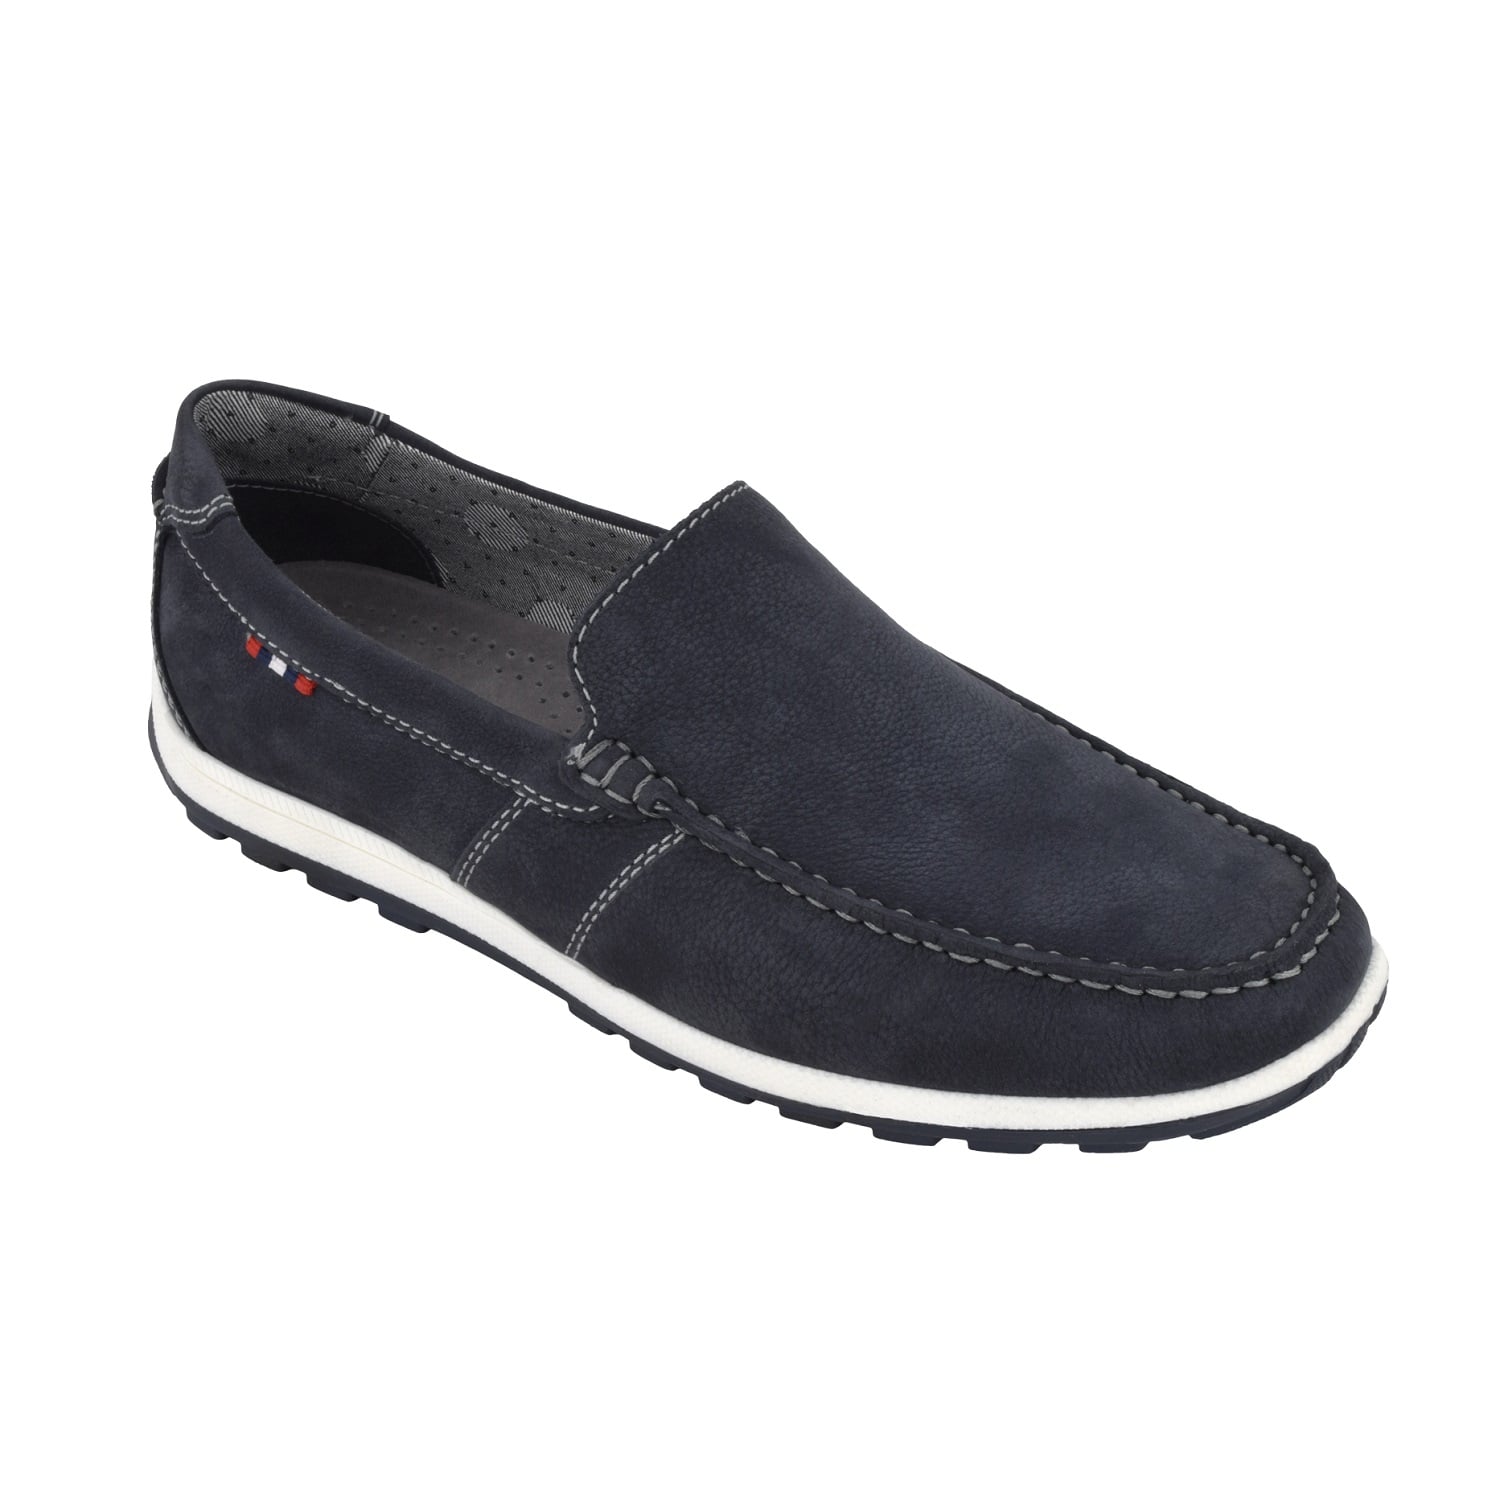 Biotime Men's Duncan Shoes with removable anti-bacterial insole